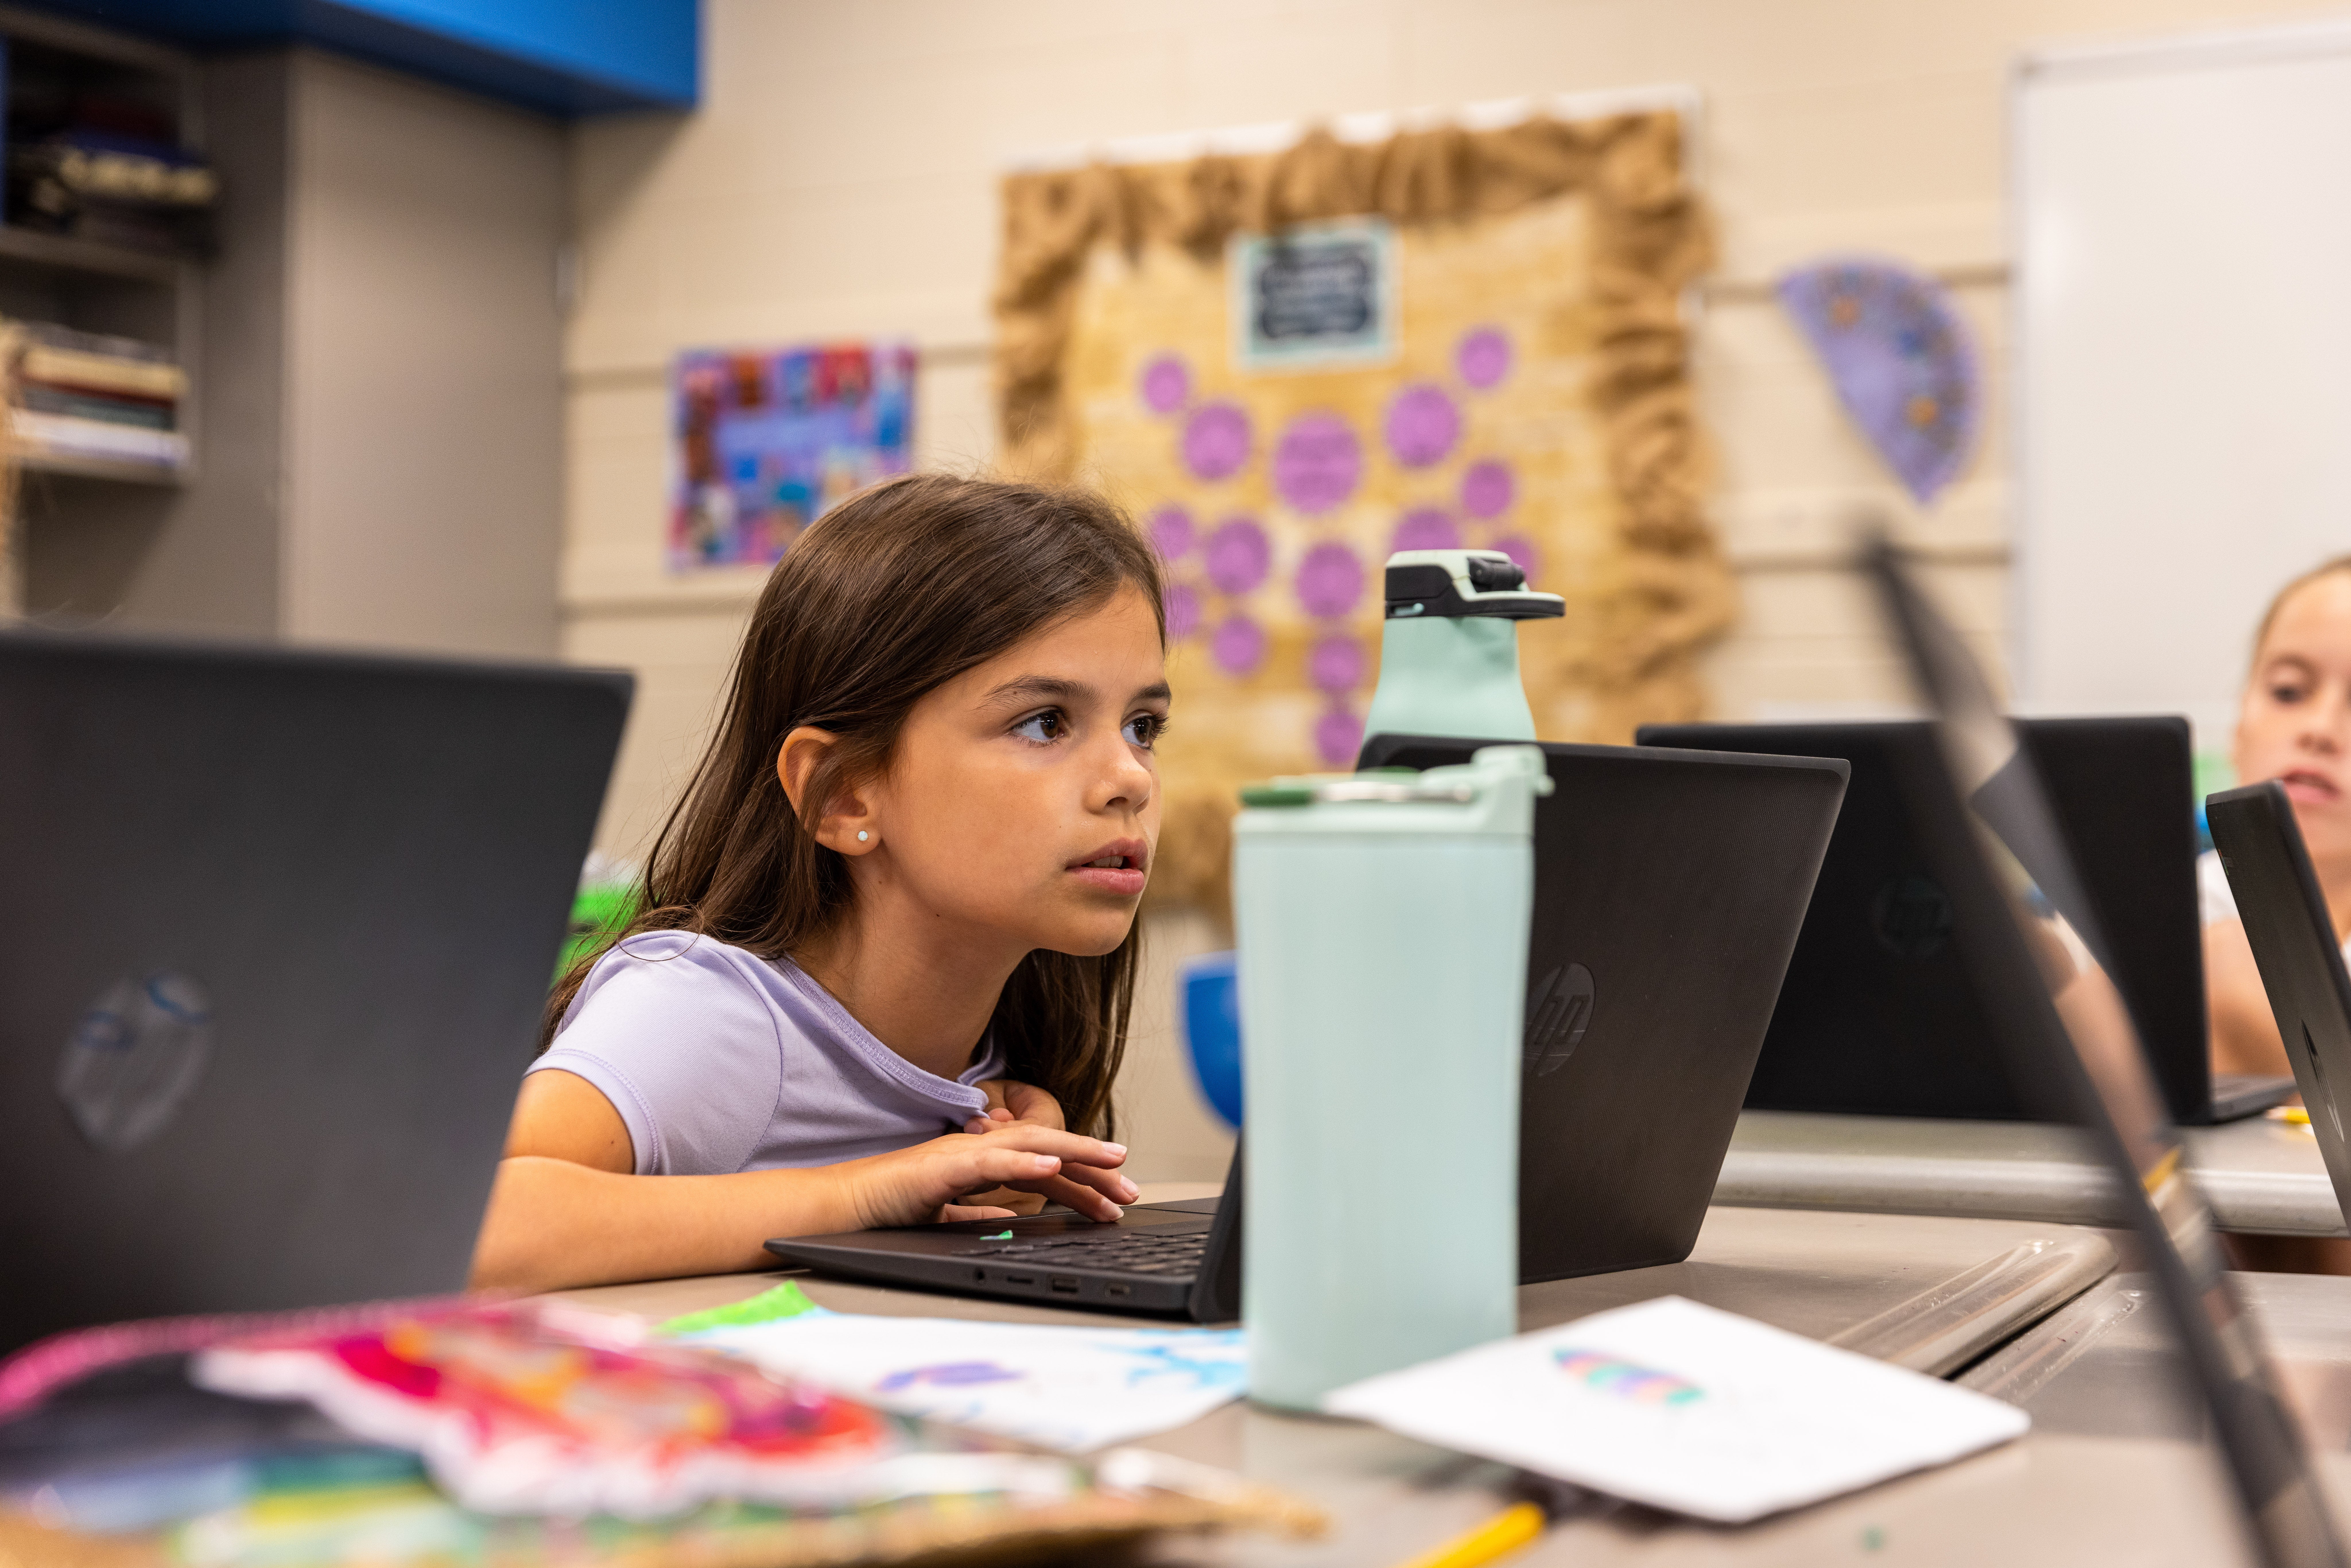 A young girl sits at a desk looking at the screen on her laptop.